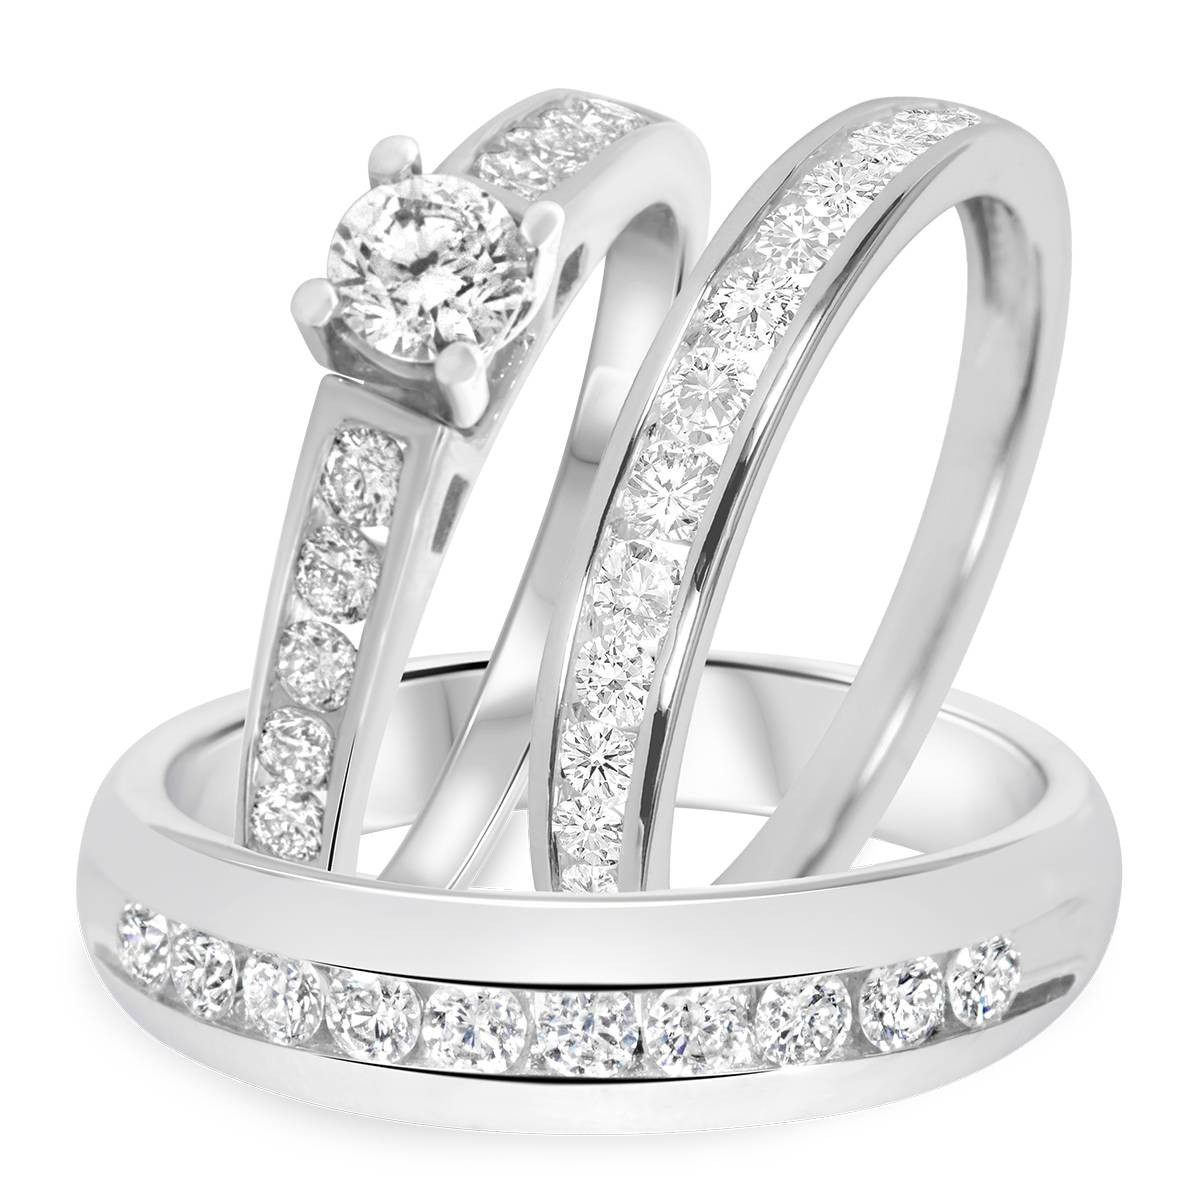 25 Ideas for Cheap Wedding Ring Sets His and Hers - Home, Family, Style